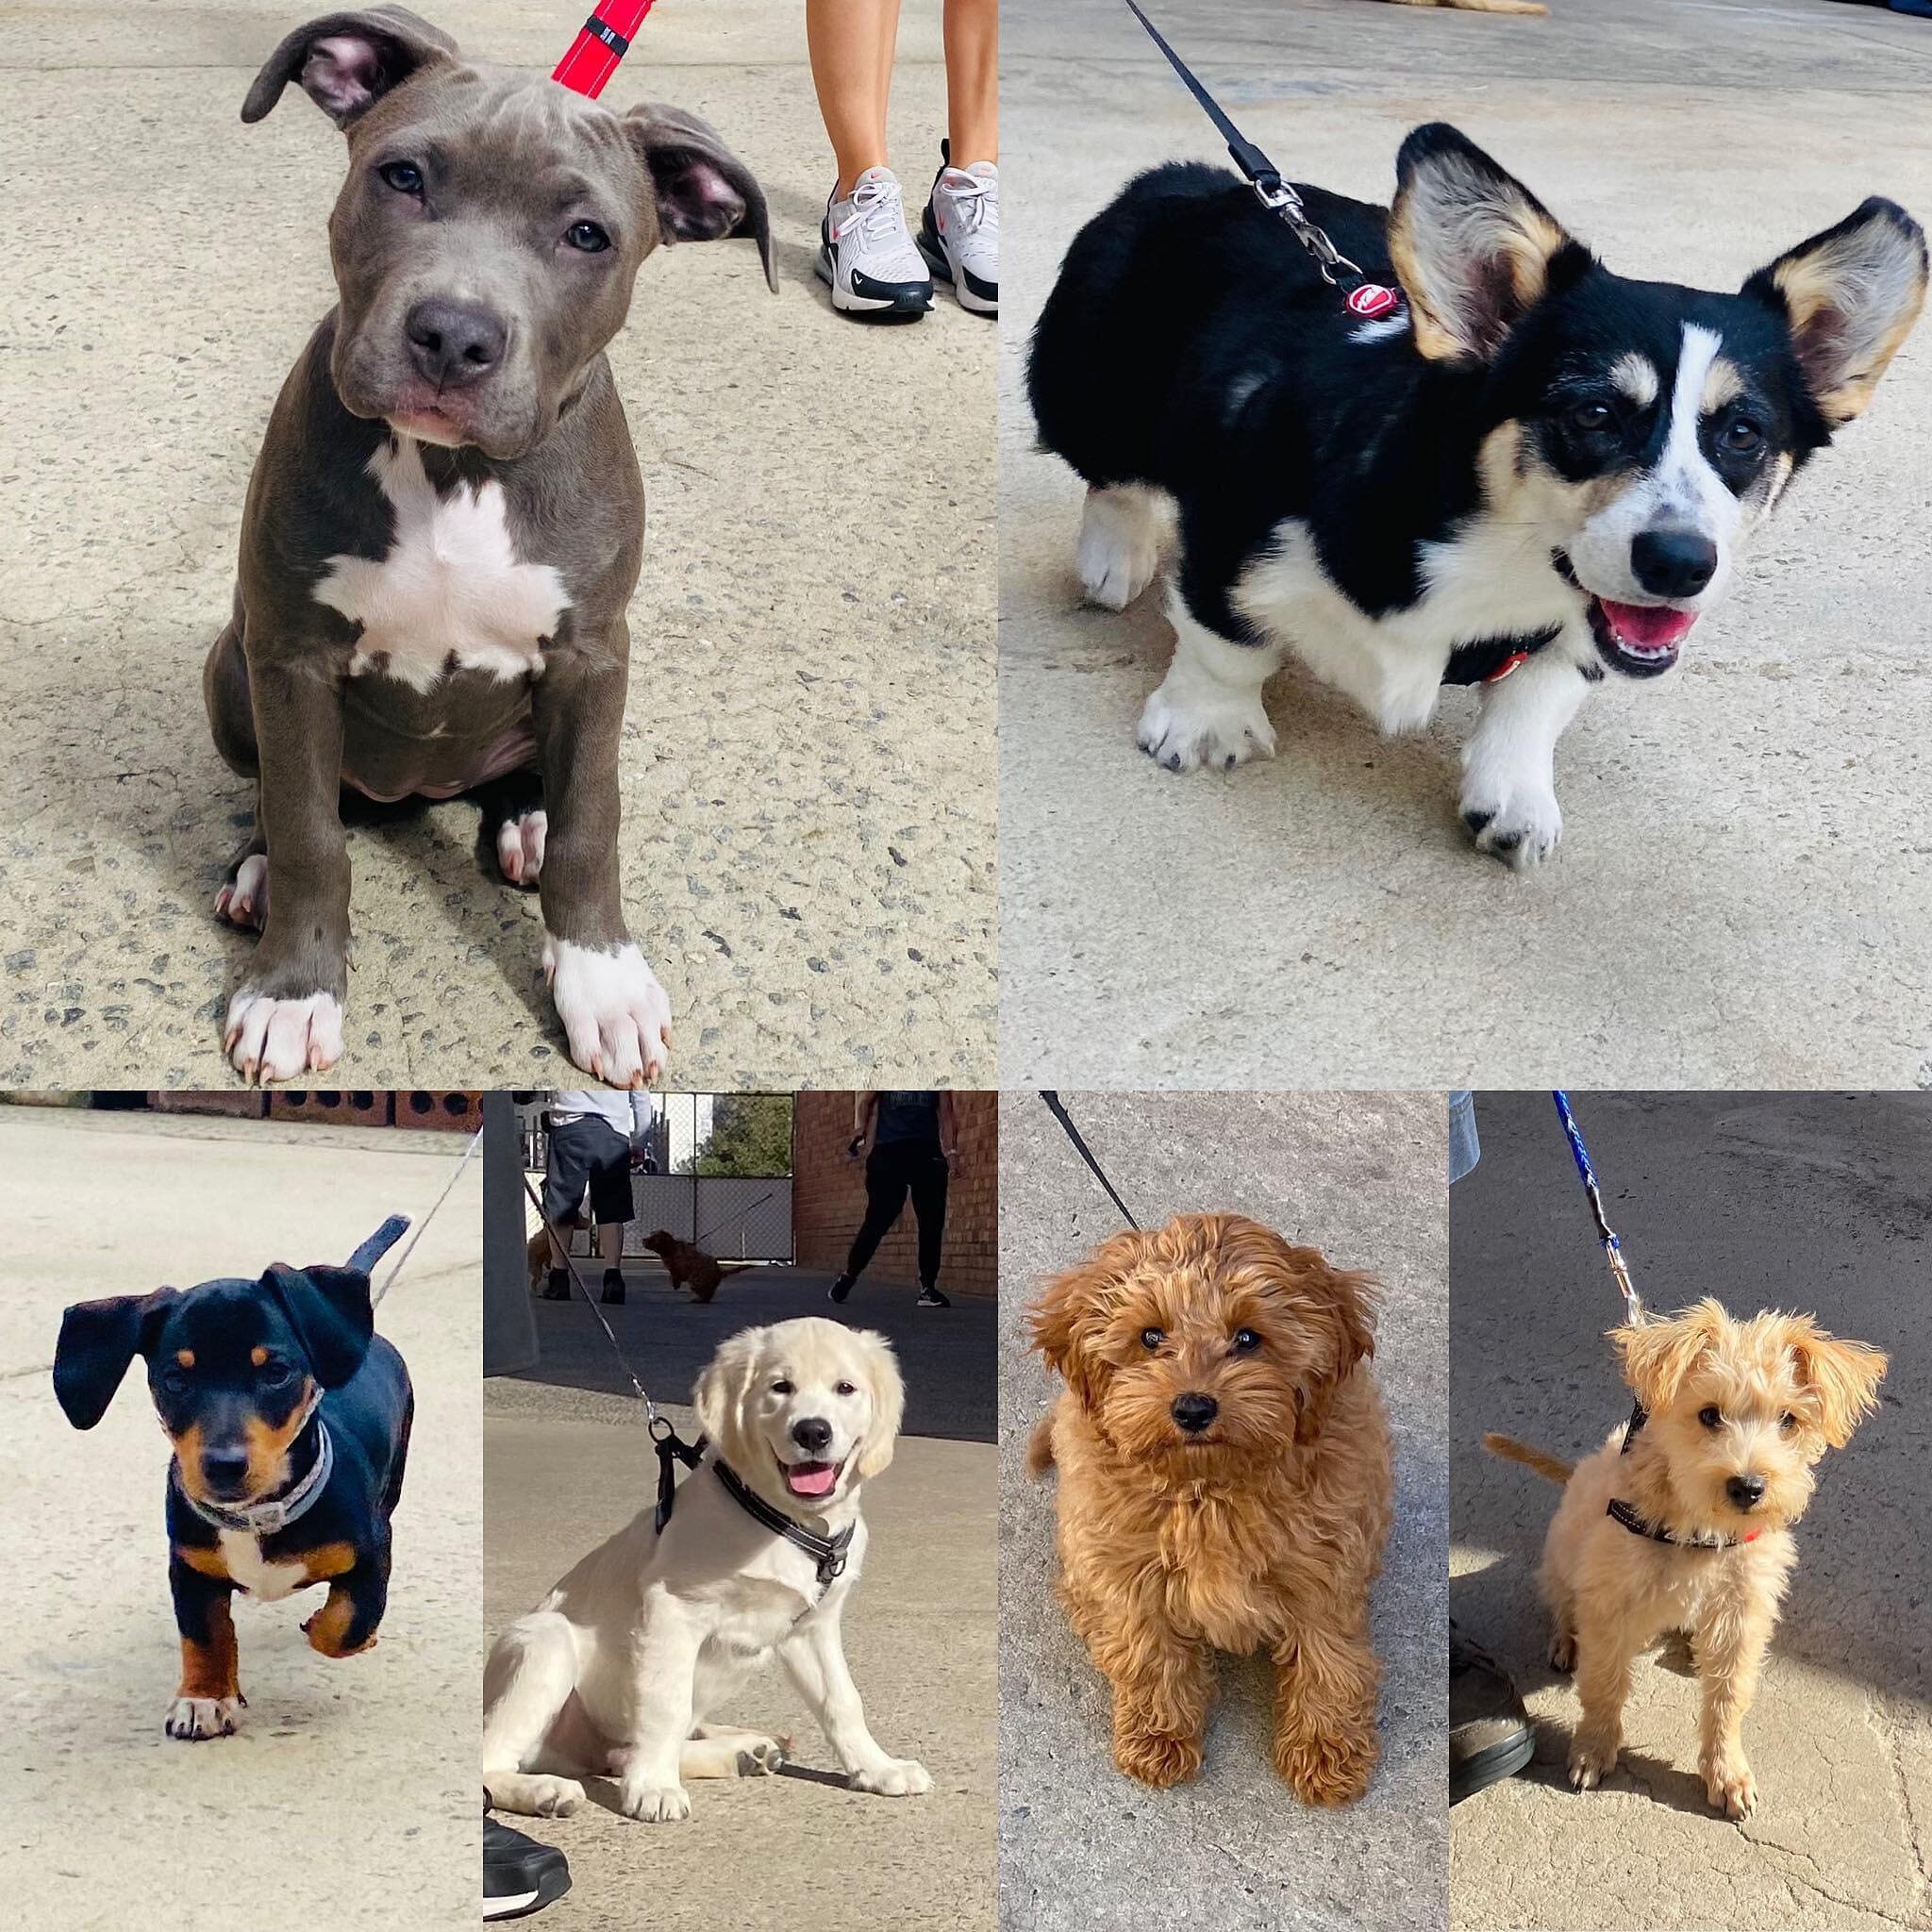 We still have a couple of spots left for this weekends group puppy class.. details below!

Group Puppy Classes will re-commence:
Saturday 13th of April at 9.30am.
Location: Mind My Lead, Highett
Duration: 3 weeks 
Age: 8-20 weeks 
Cost: $220.00

🐶 ?